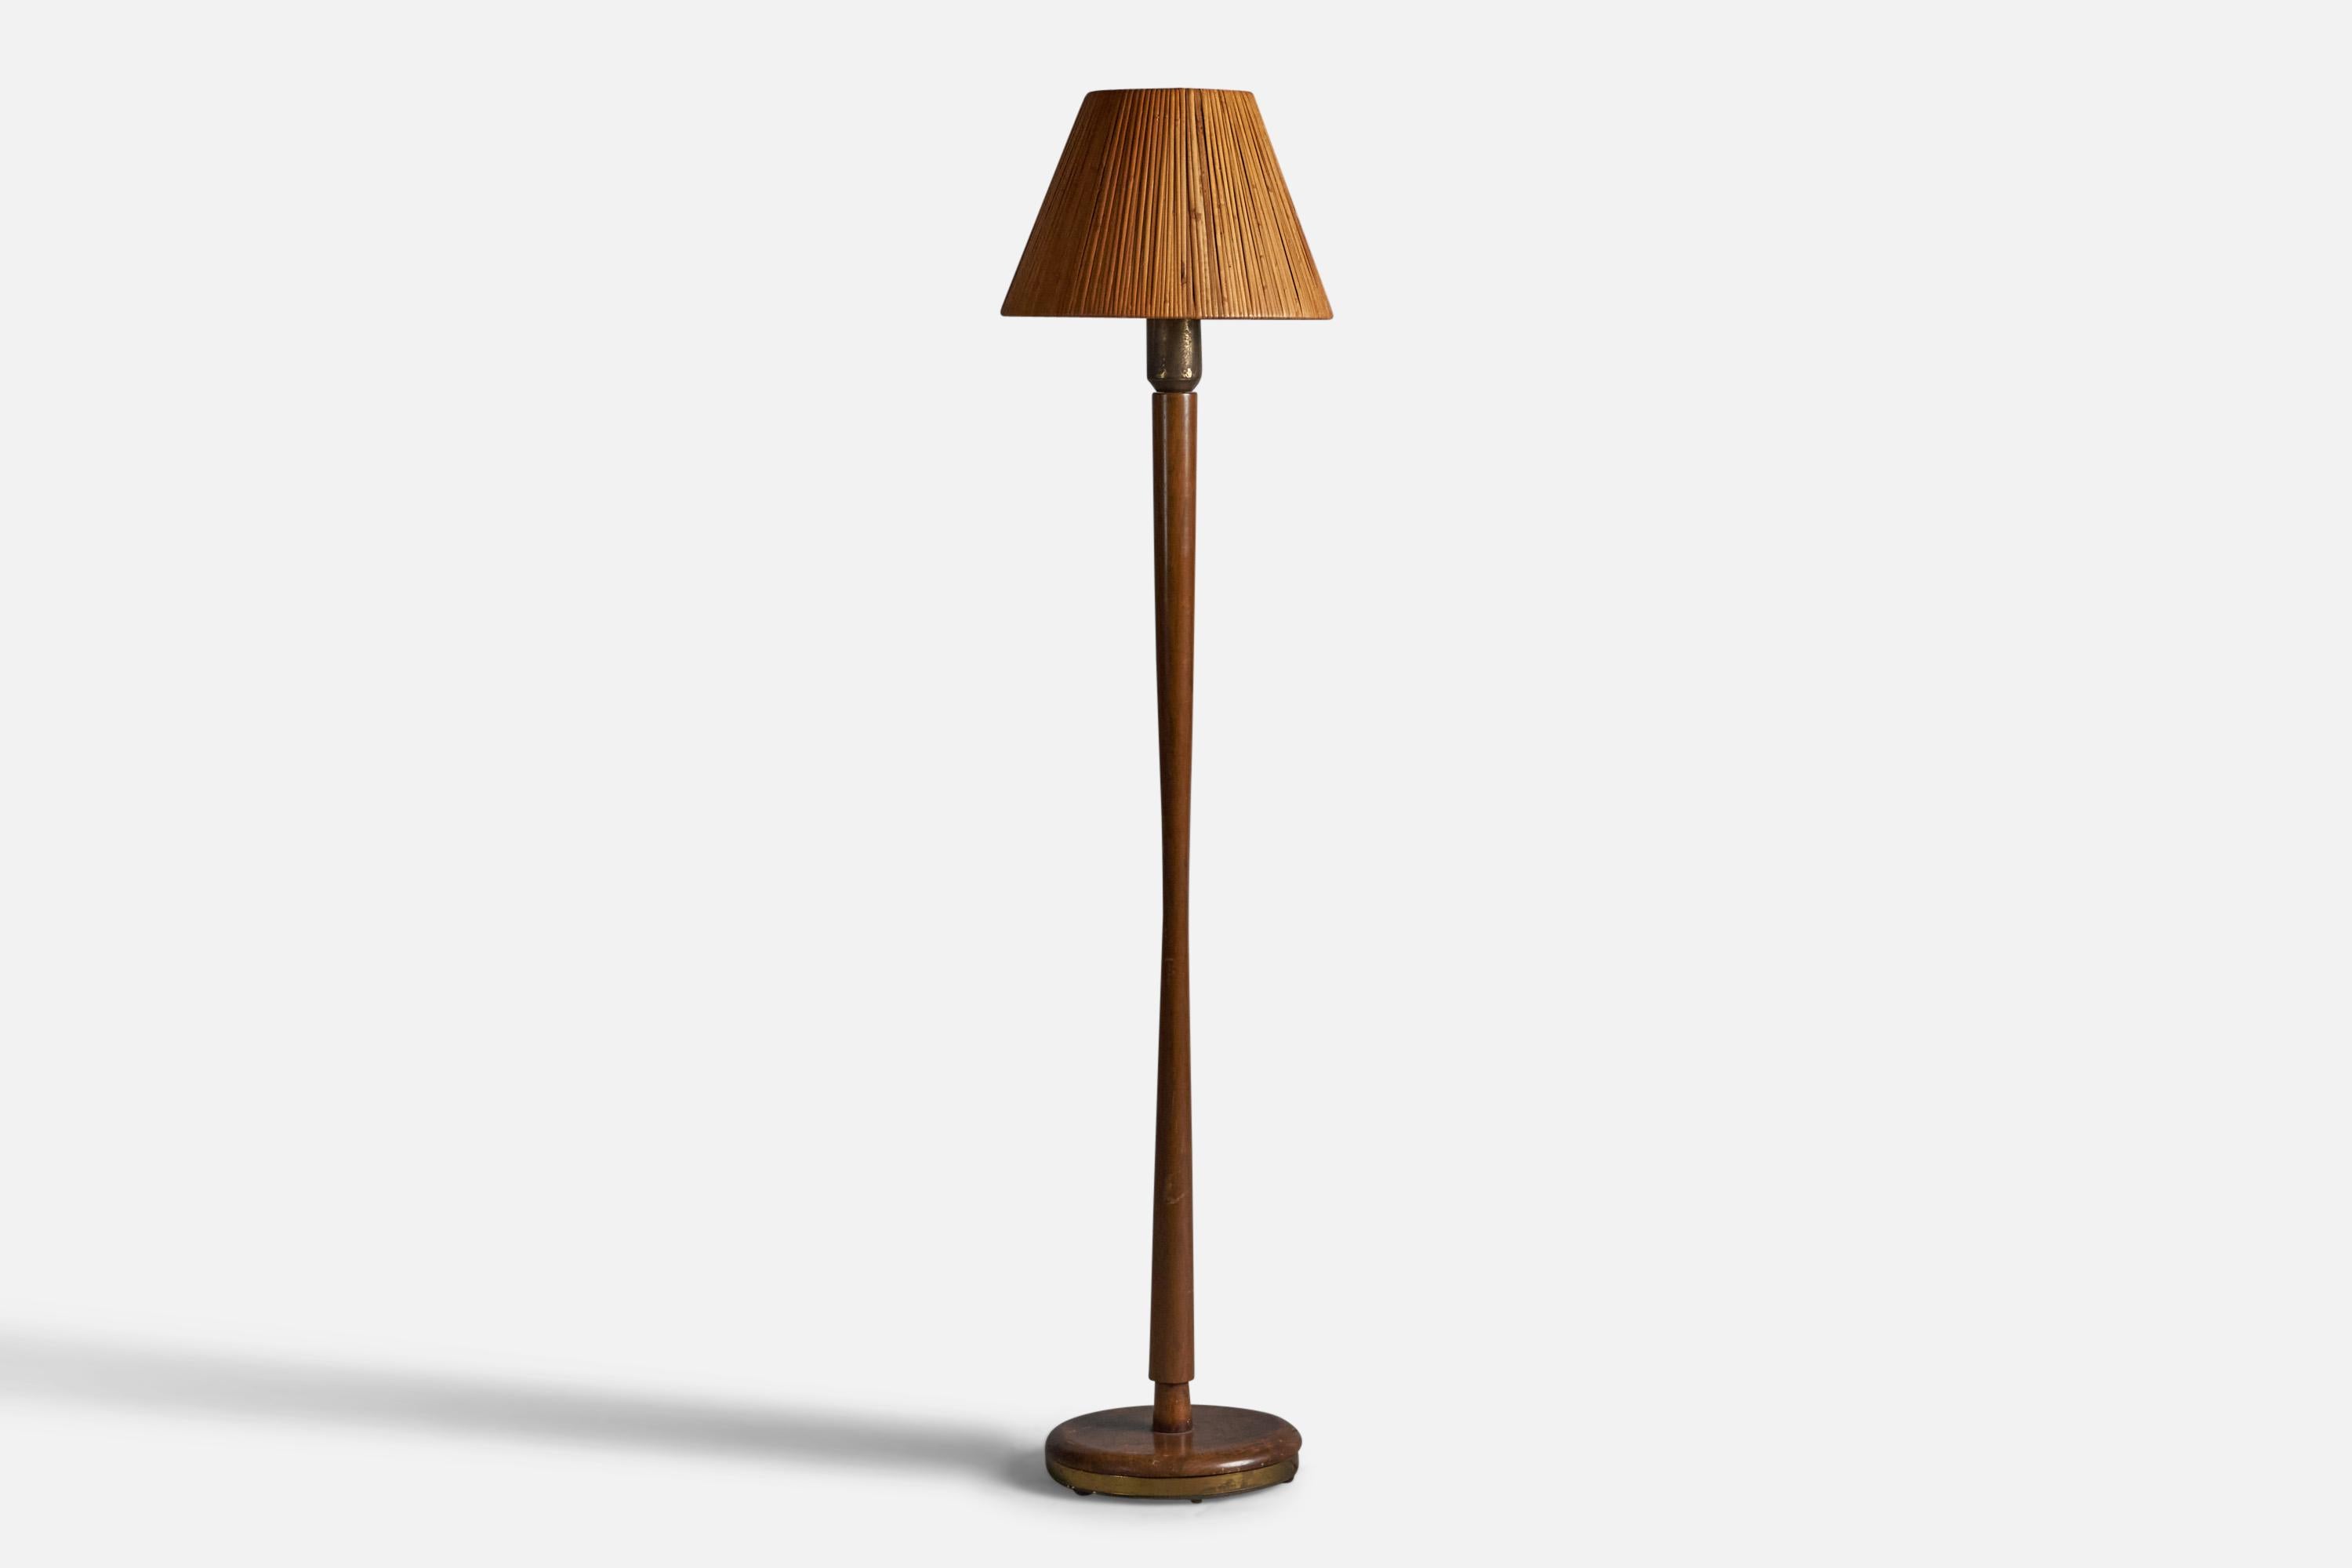 A walnut, brass and rattan floor lamp, design attributed to Vladimir Kagan, USA, c. 1950s.

Overall Dimensions: 59